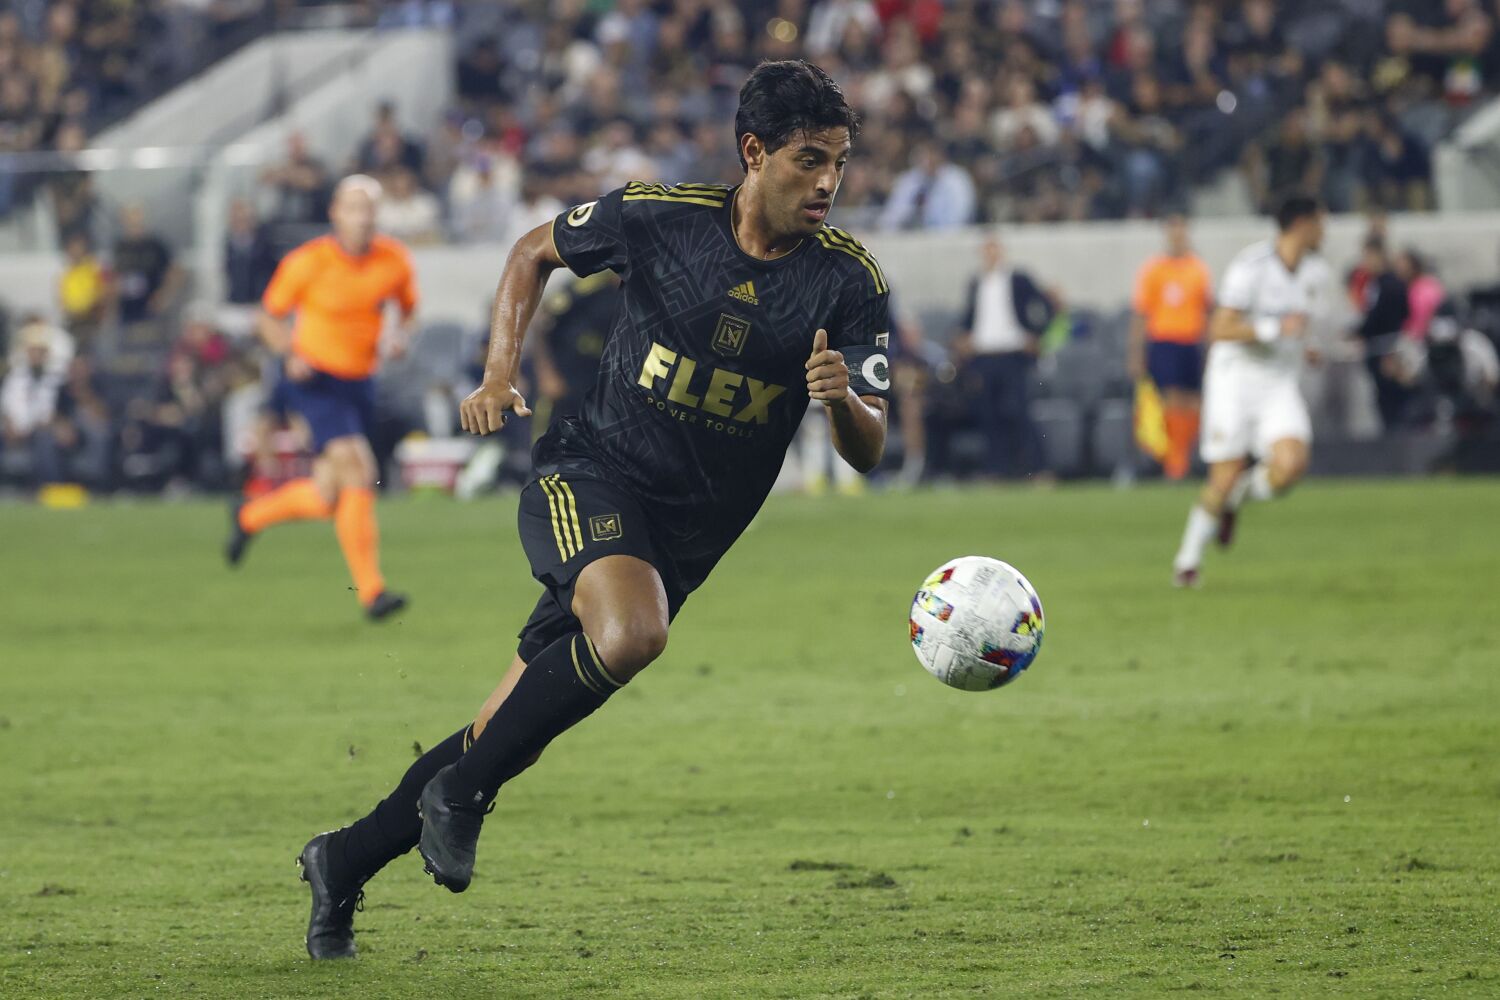 LAFC aiming for CONCACAF Champions League title after heartbreaking 2020 run